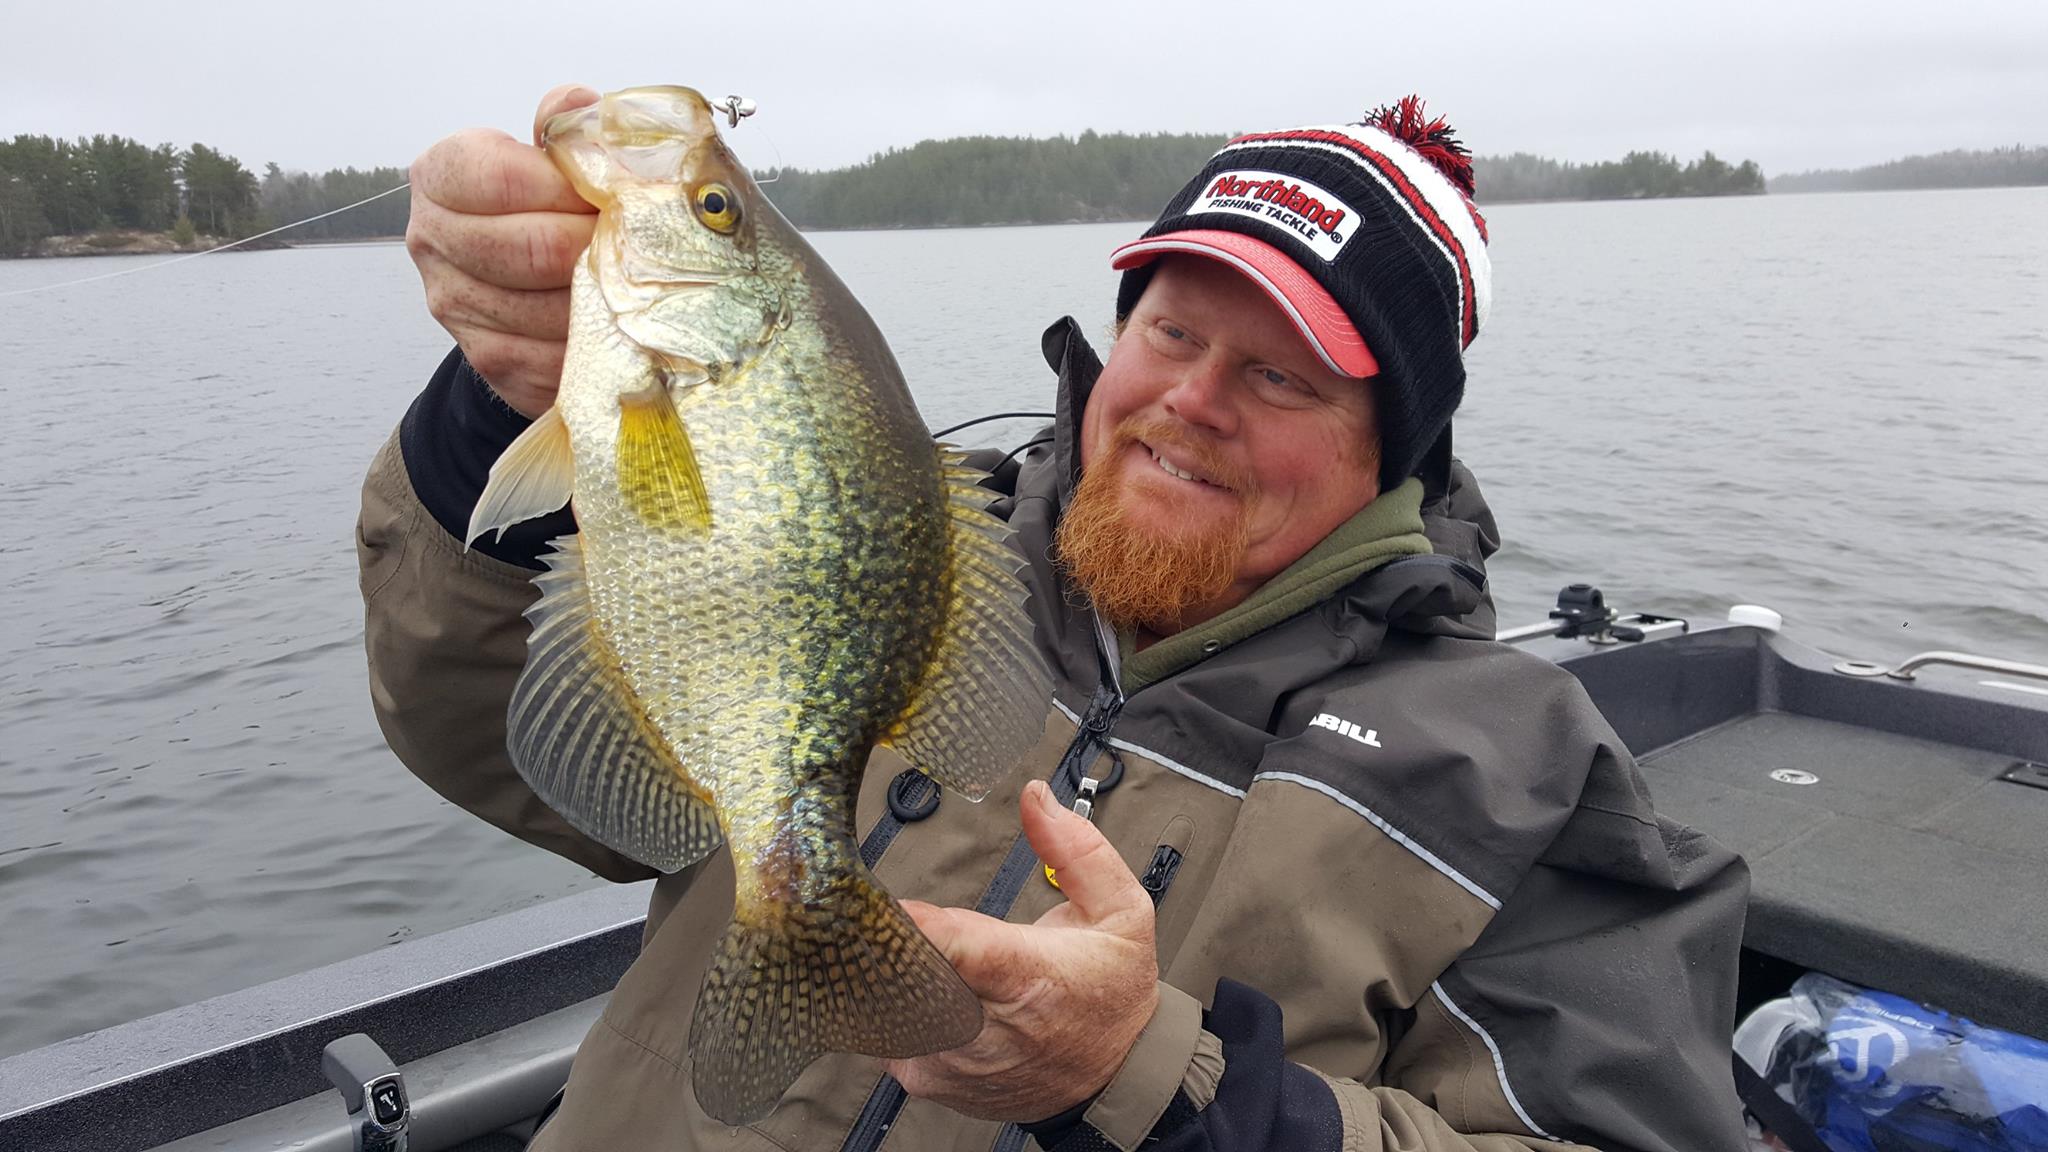 Brian 'Bro' Brosdahl holding up a crappie he caught fishing in the spring.